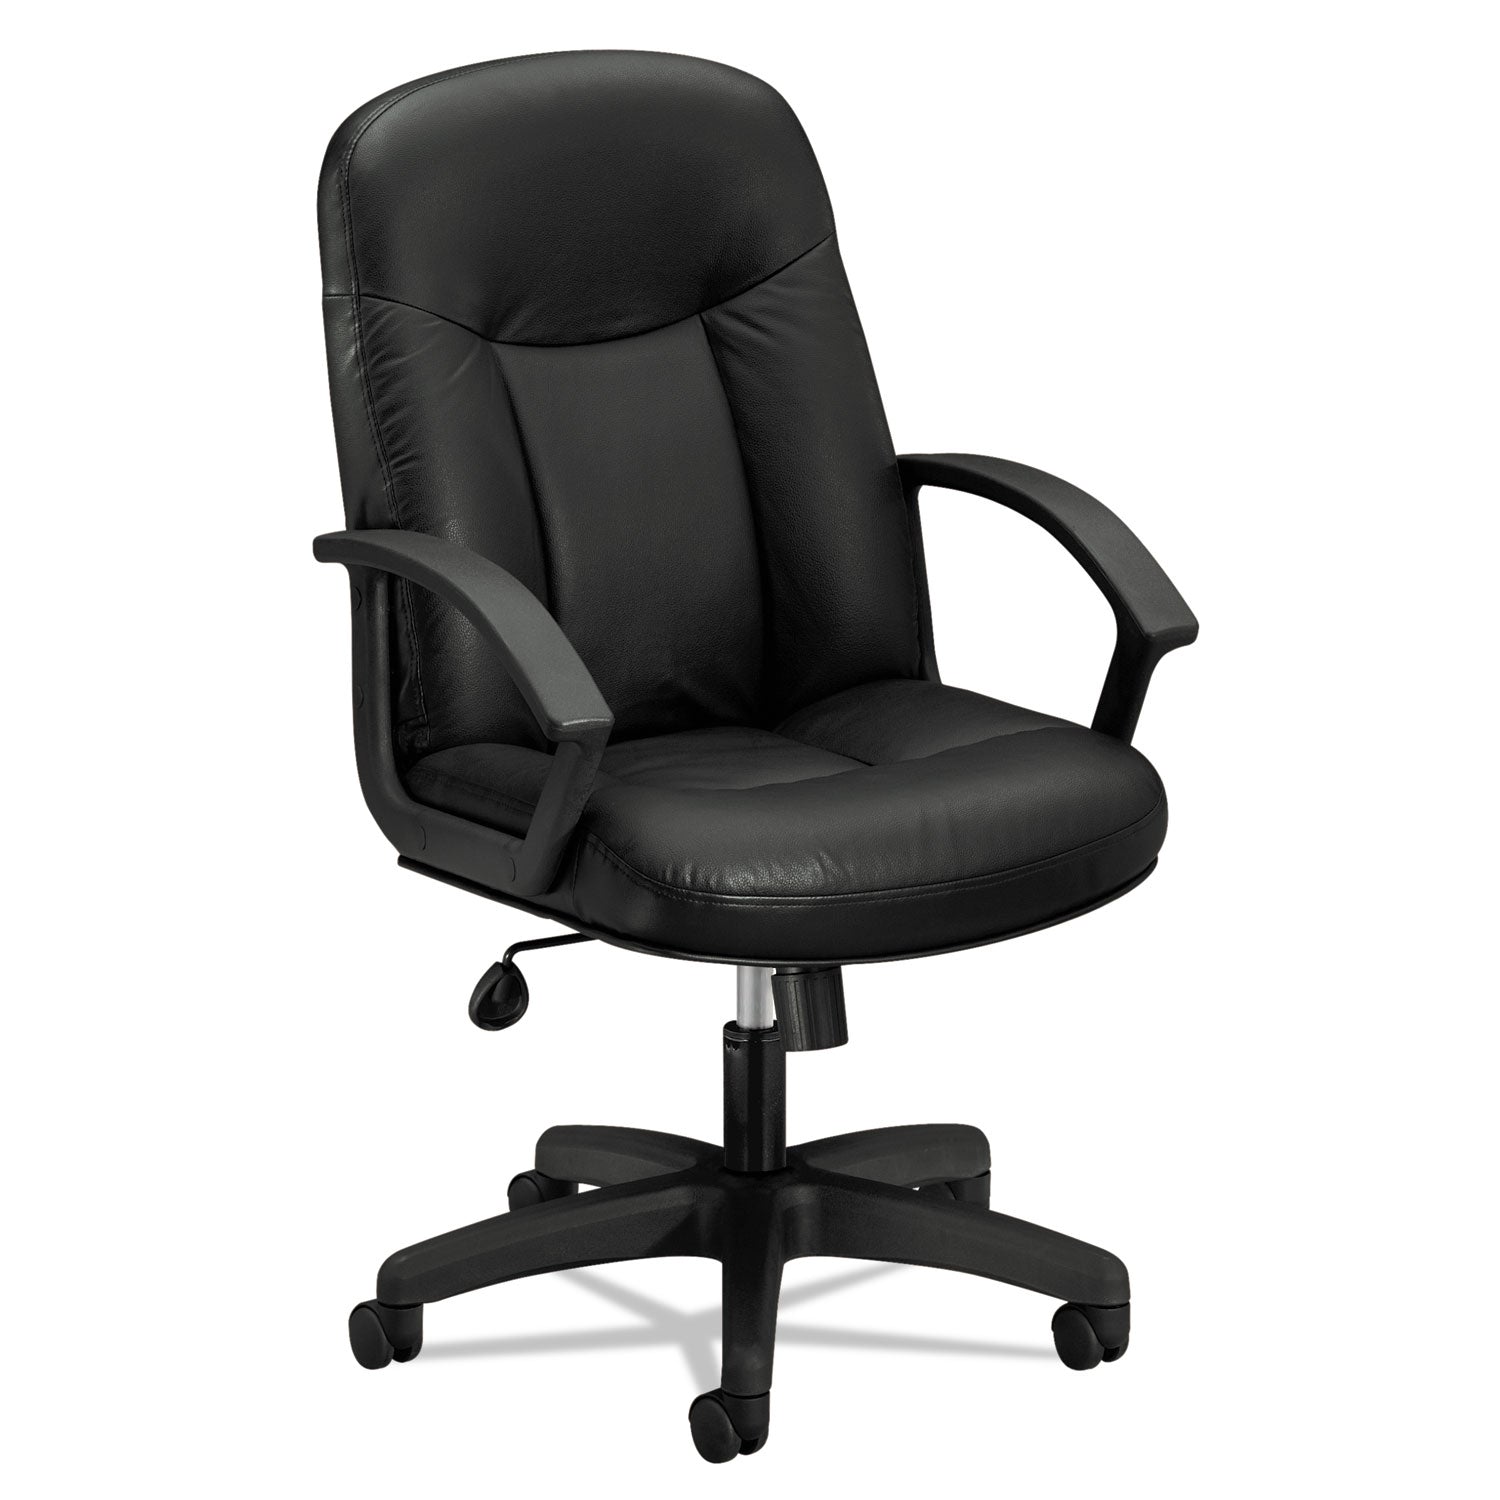 HVL601 Series Executive High-Back Leather Chair, Supports Up to 250 lb, 17.44" to 20.94" Seat Height, Black - 